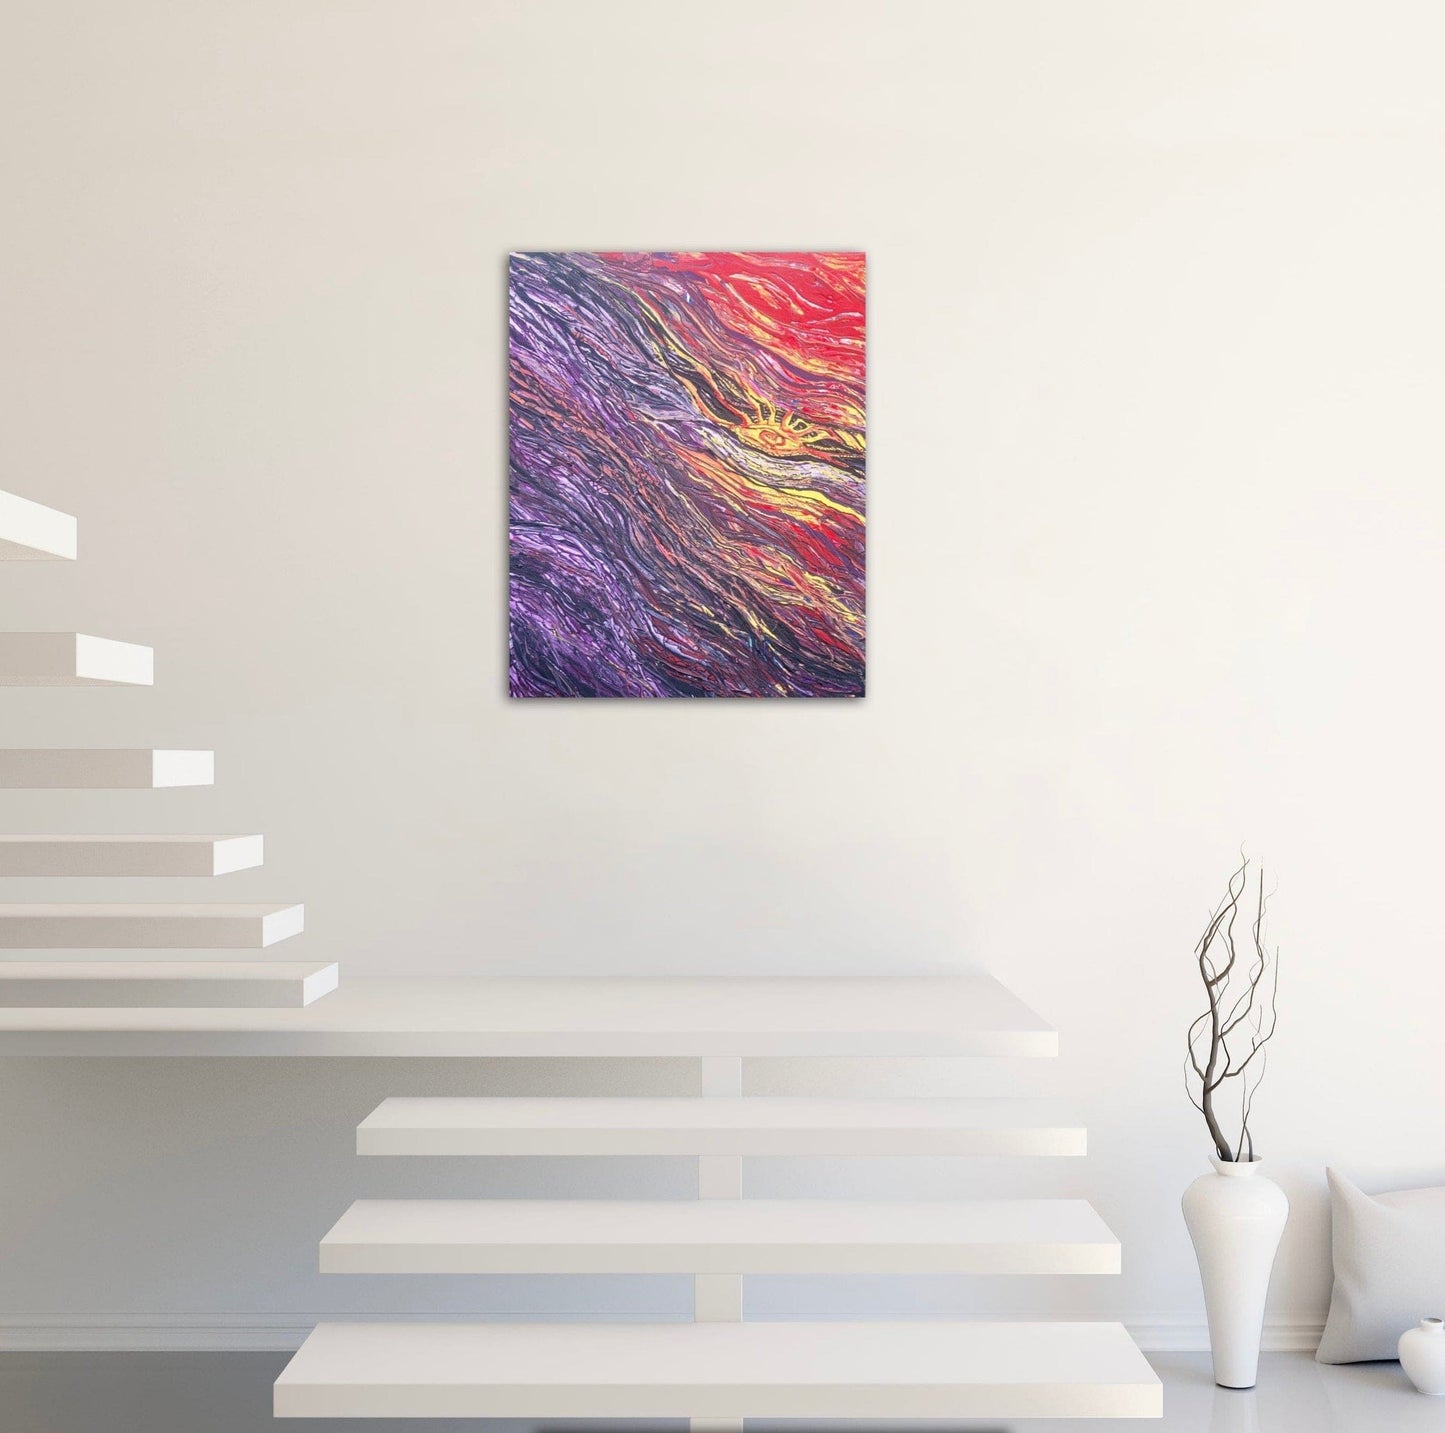 Eye of The Storm - Wavy And Rippled, Acrylic Ocean Wave, Original Painting by Art with Evie